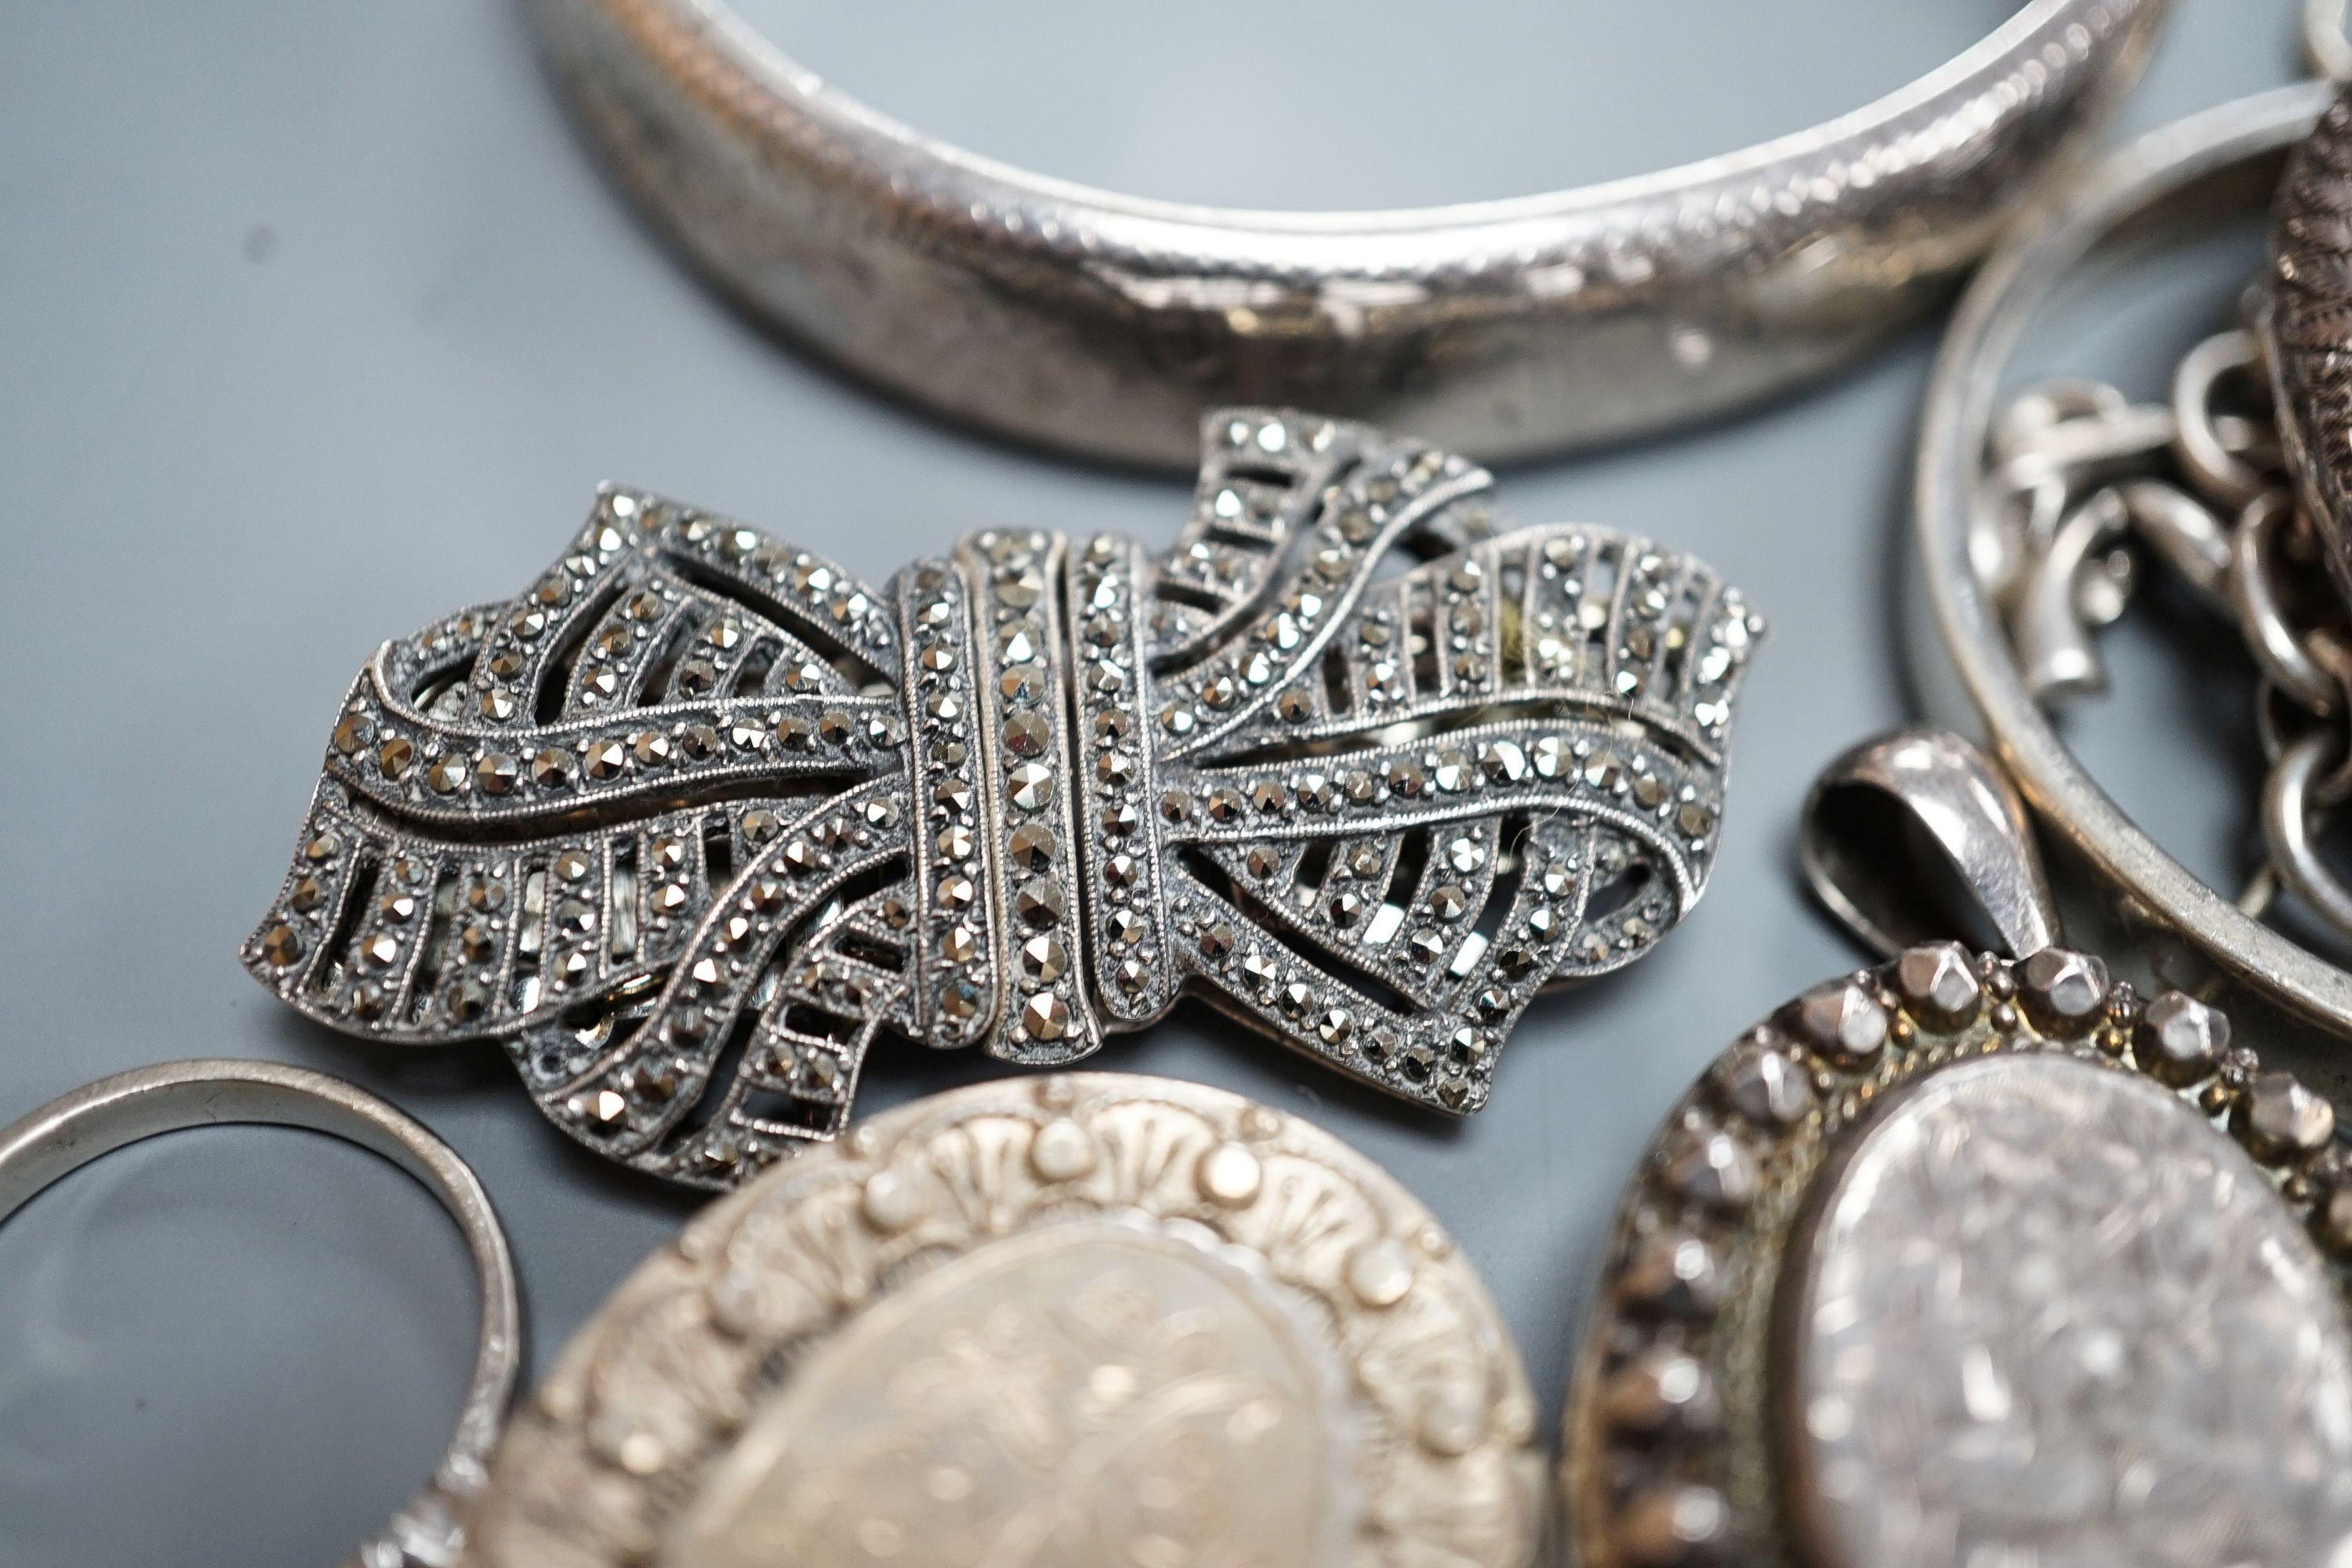 A mixed quantity of assorted silver and white metal jewellery including costume and a silver and enamel compact.